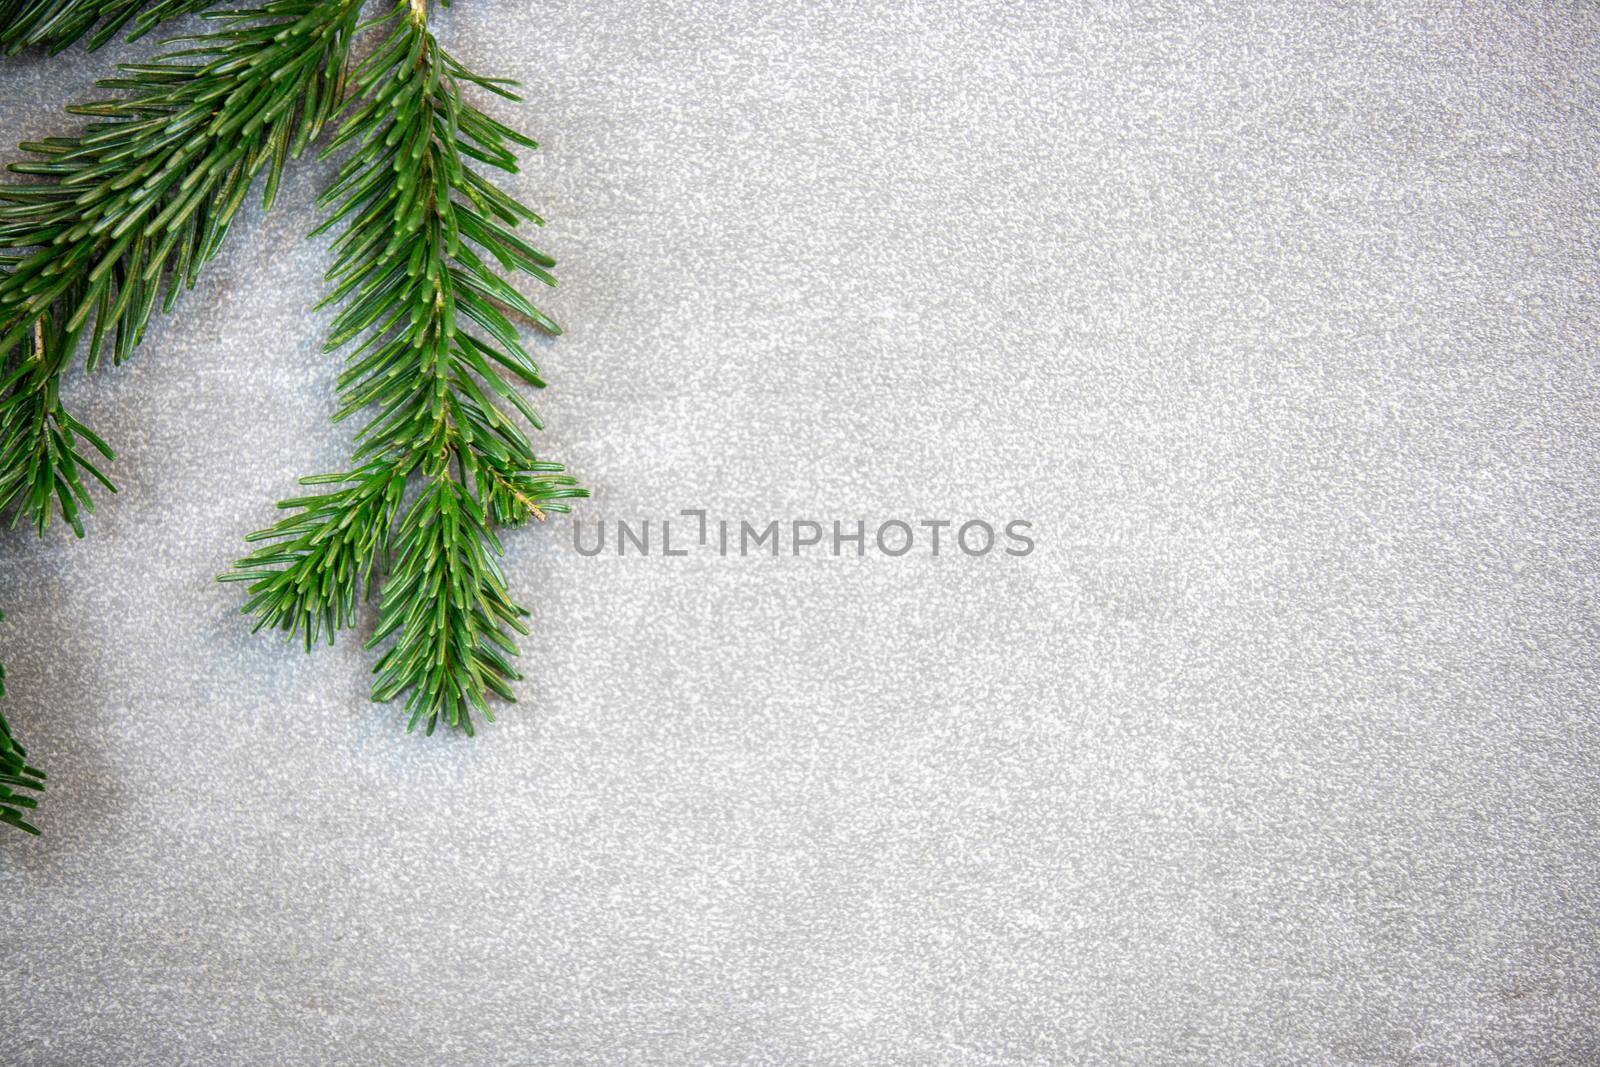 Christmas motif, texture, background with branches of a Nordmann fir left at the top on a grey marbled  background with free space for text